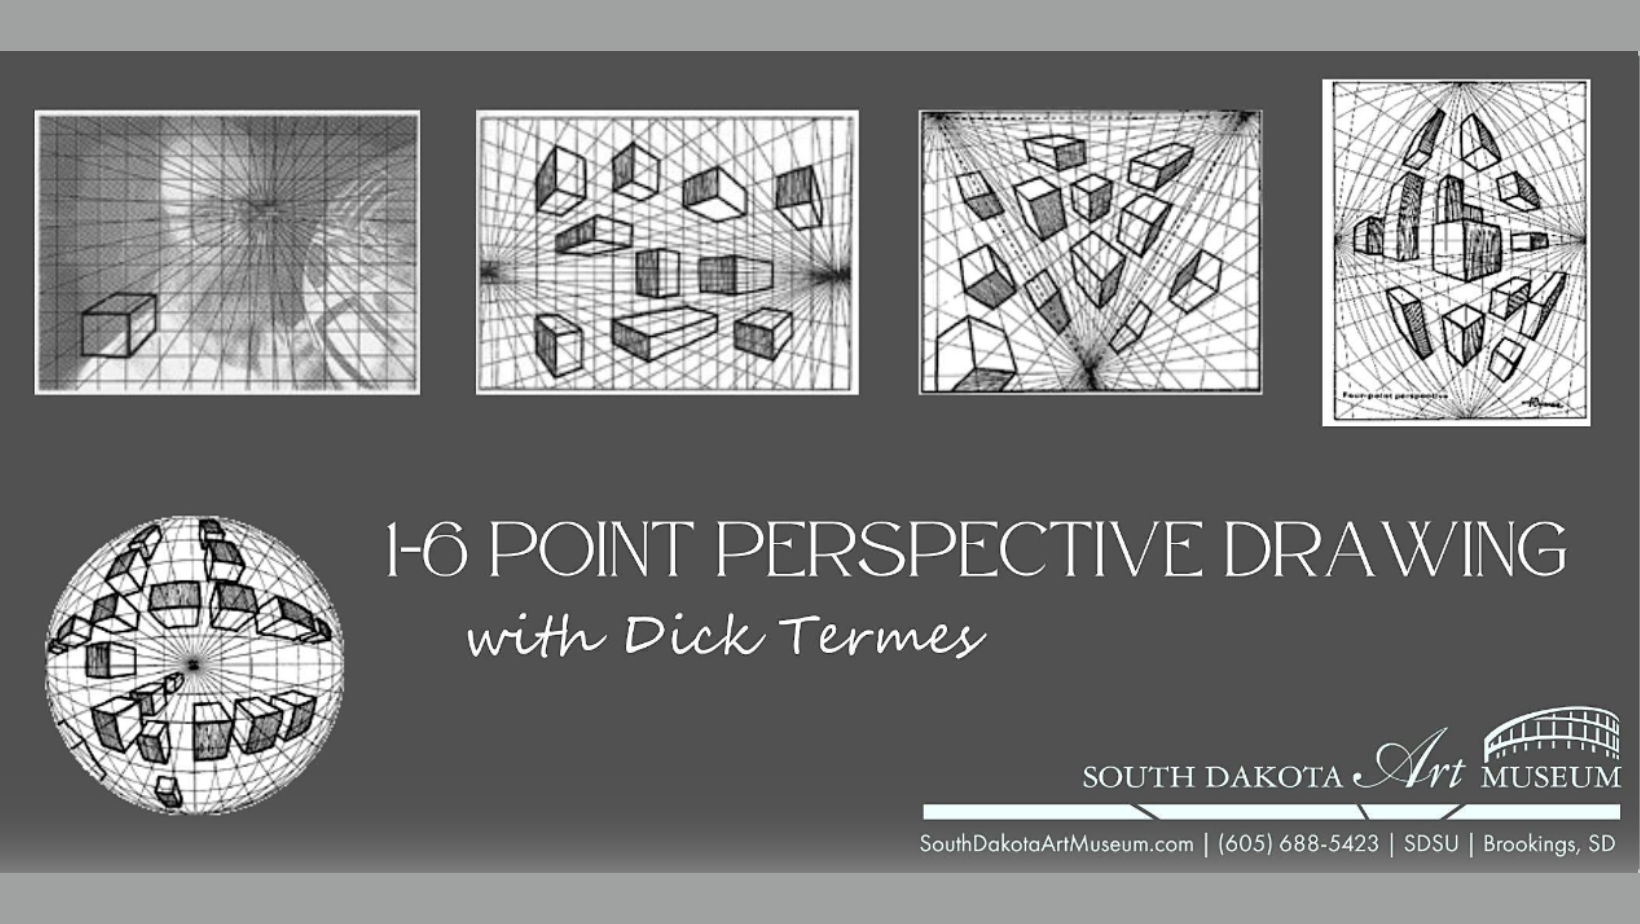 PERSPECTIVE DRAWING WORKSHOP WITH DICK TERMES